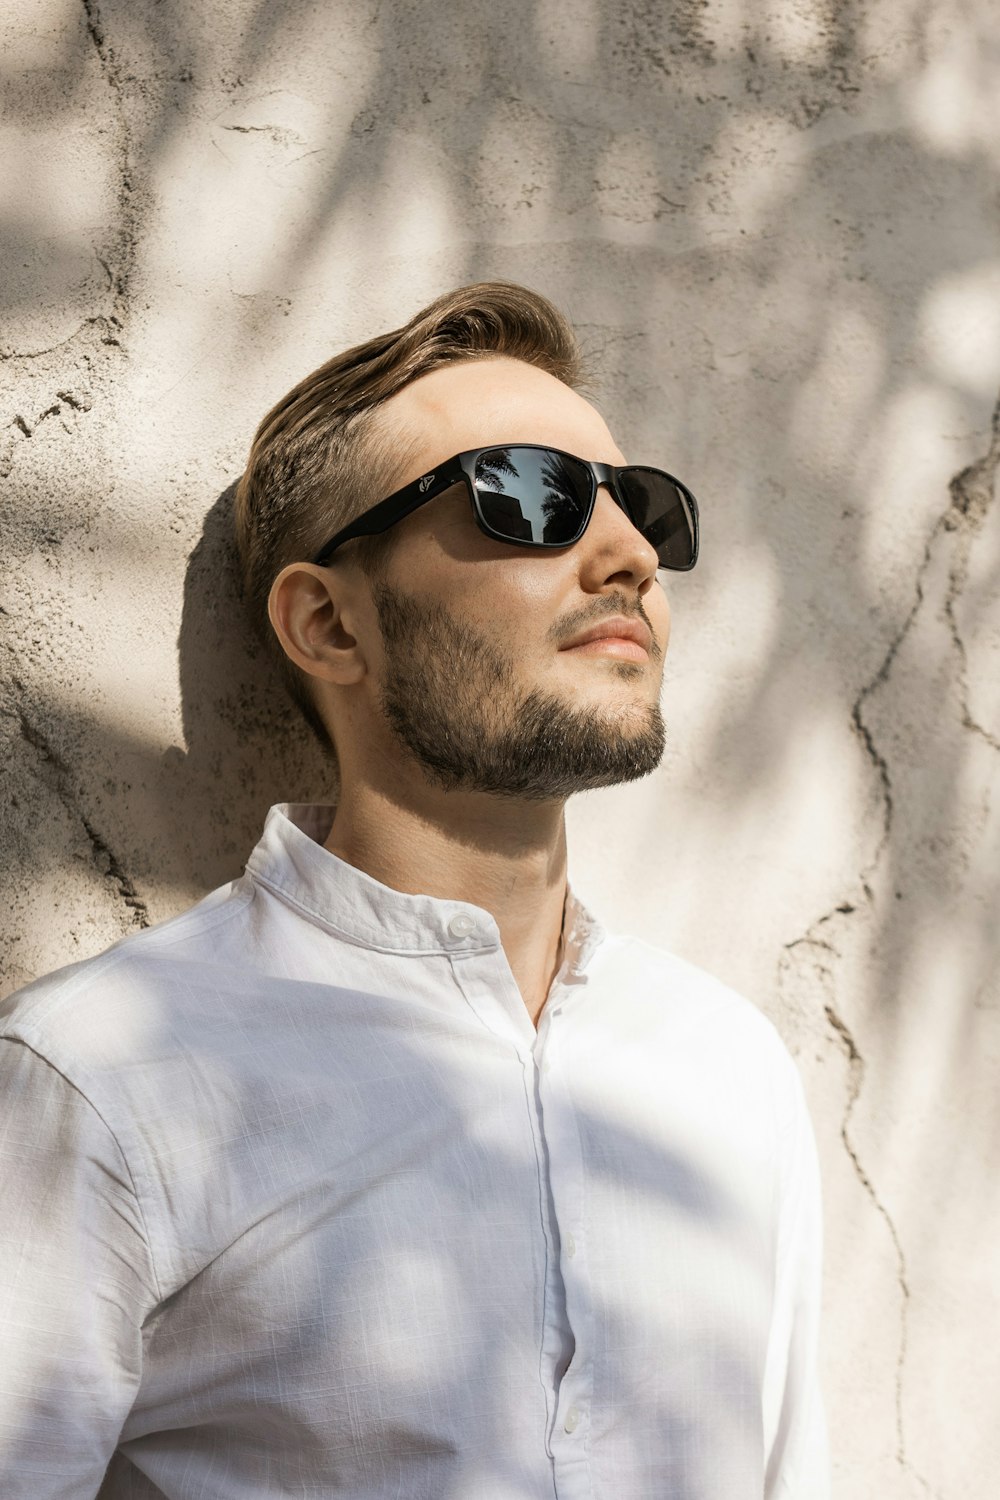 a man wearing sunglasses leaning against a wall